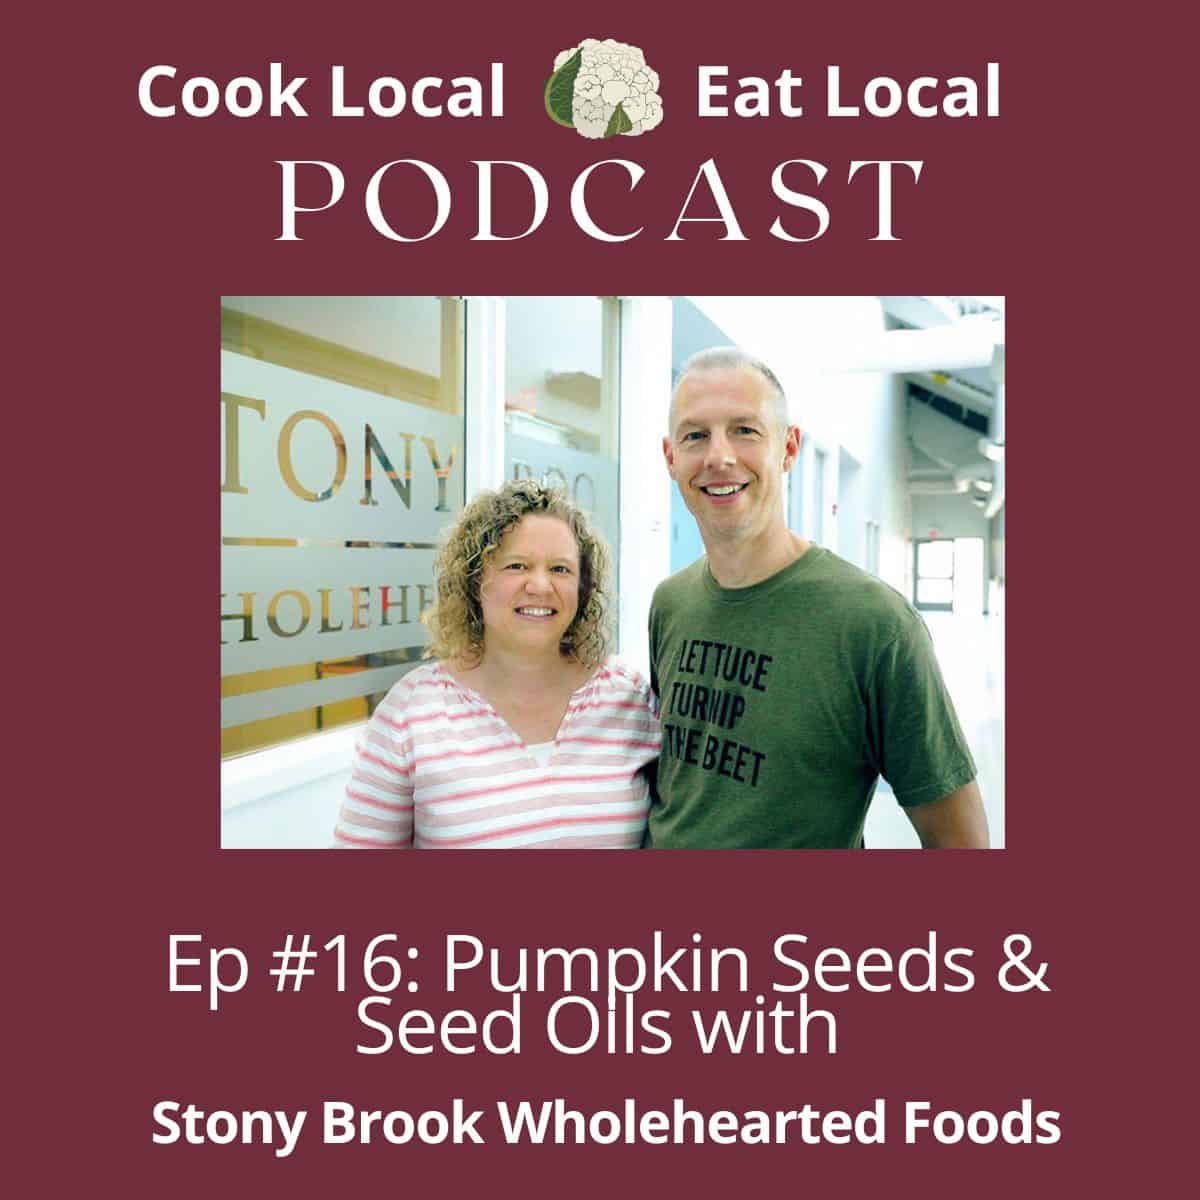 Cook Local podcast cover with Greg Woodworth and Kelly Coughlin, Co-Founders of Stony Brook Wholehearted Foods.